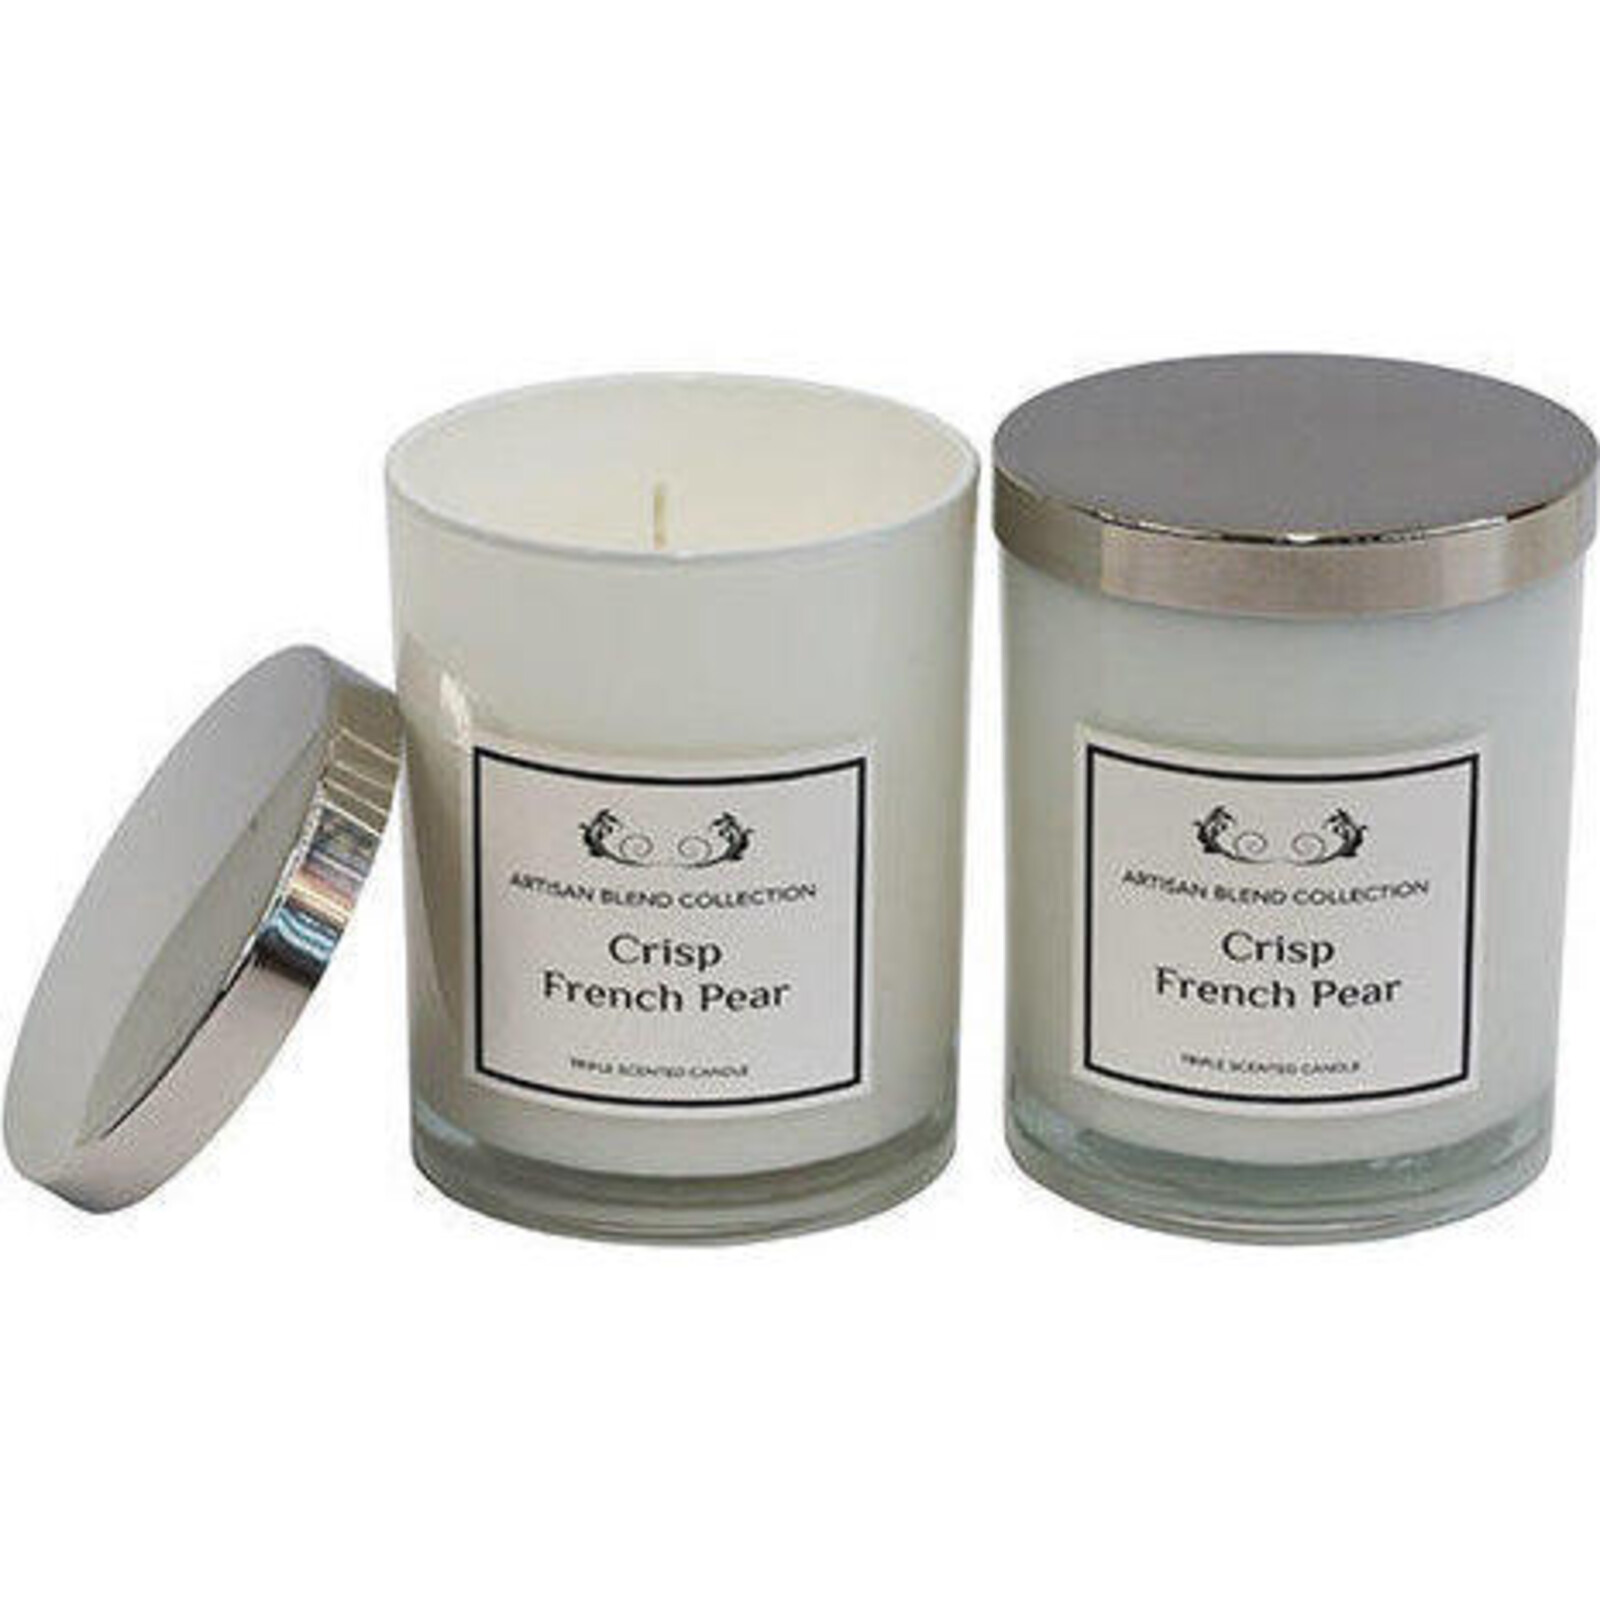 Candle Artisan Blend Crisp French Pear